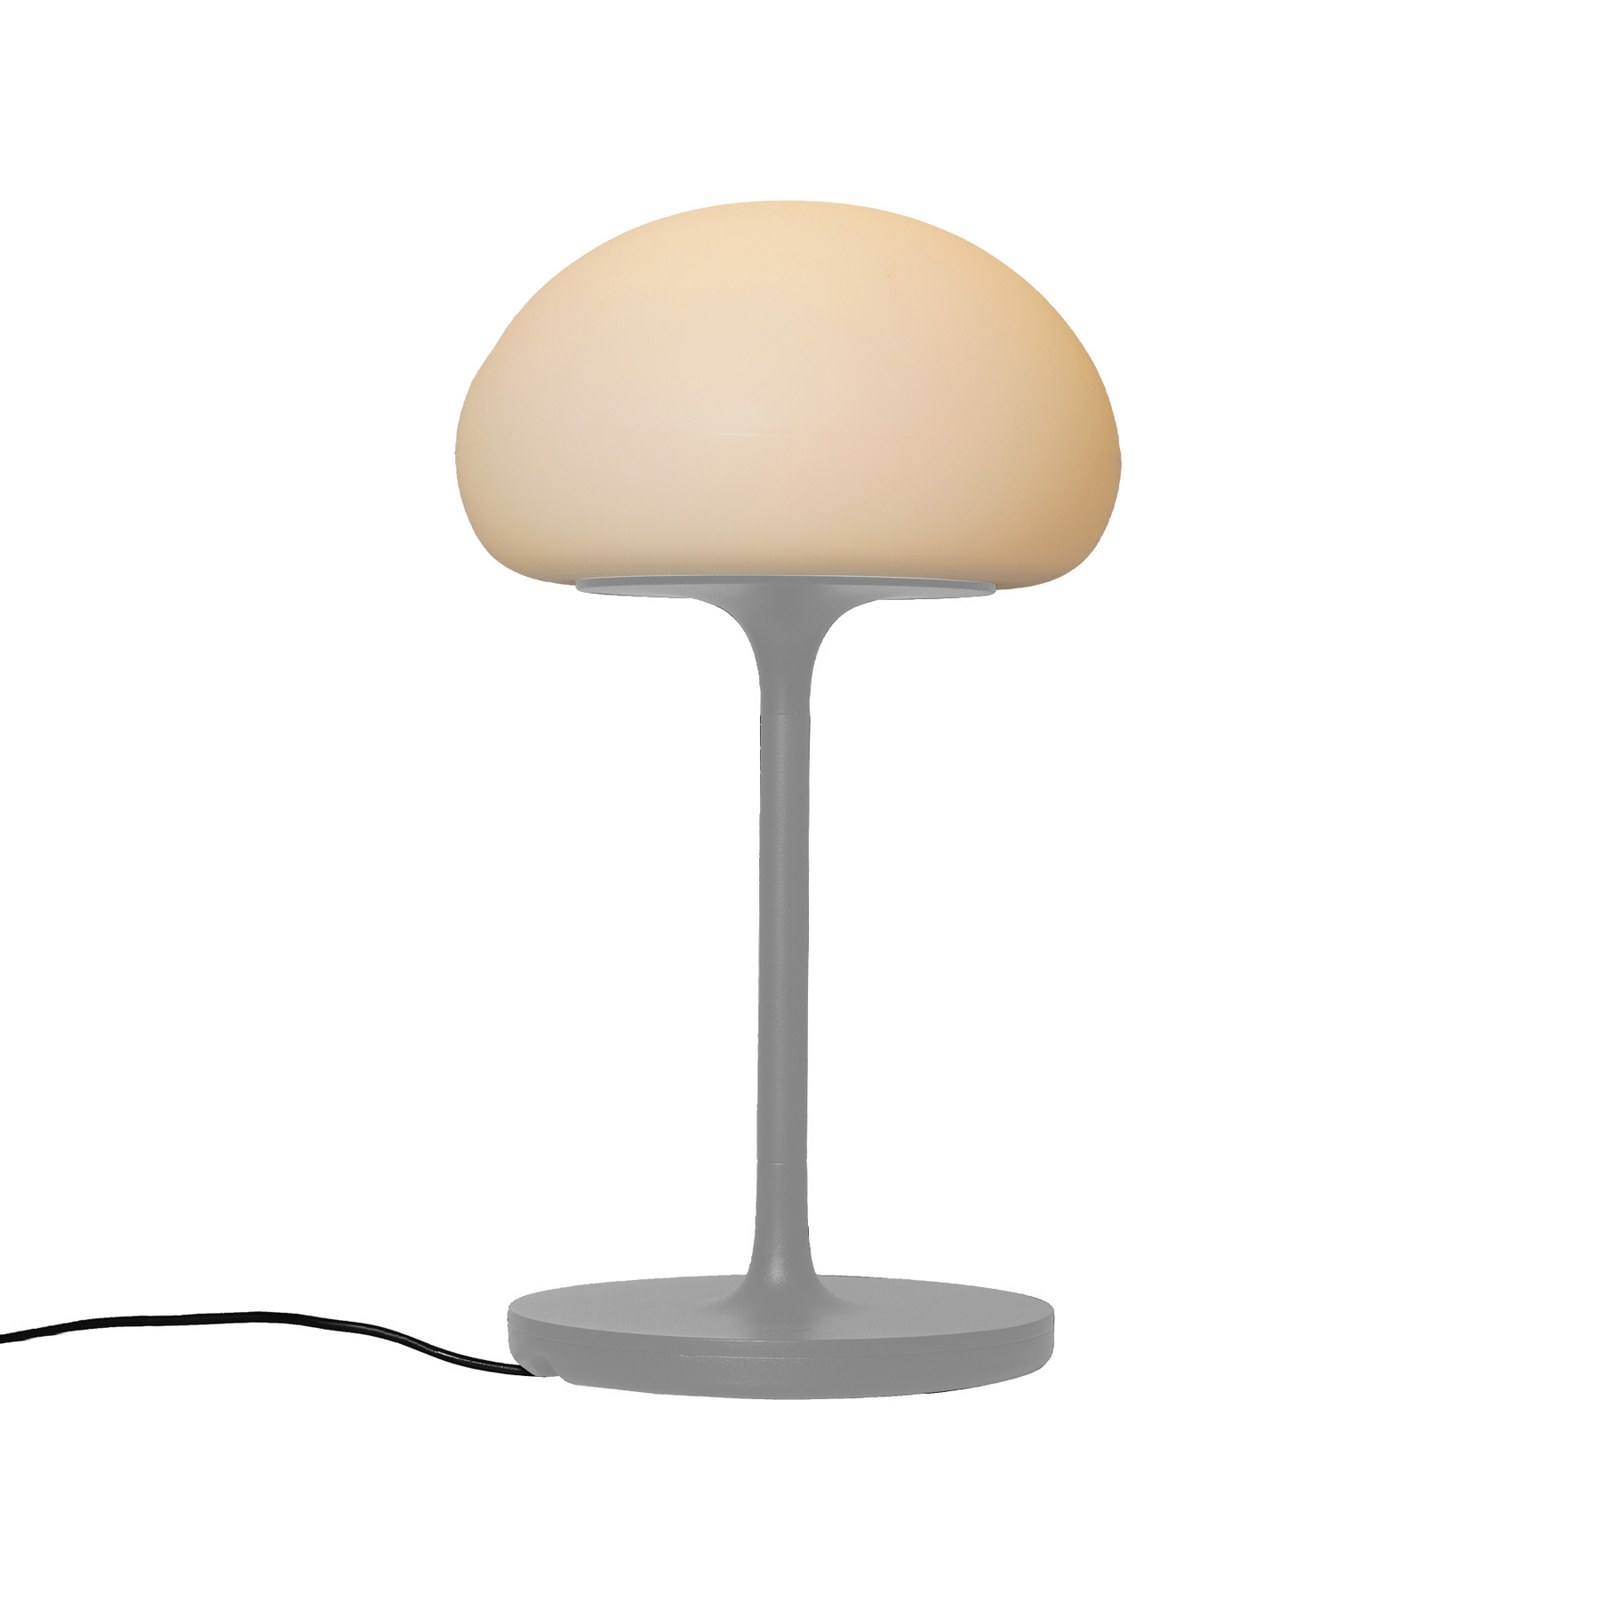 Sponge on a Stick table lamp with a battery grey